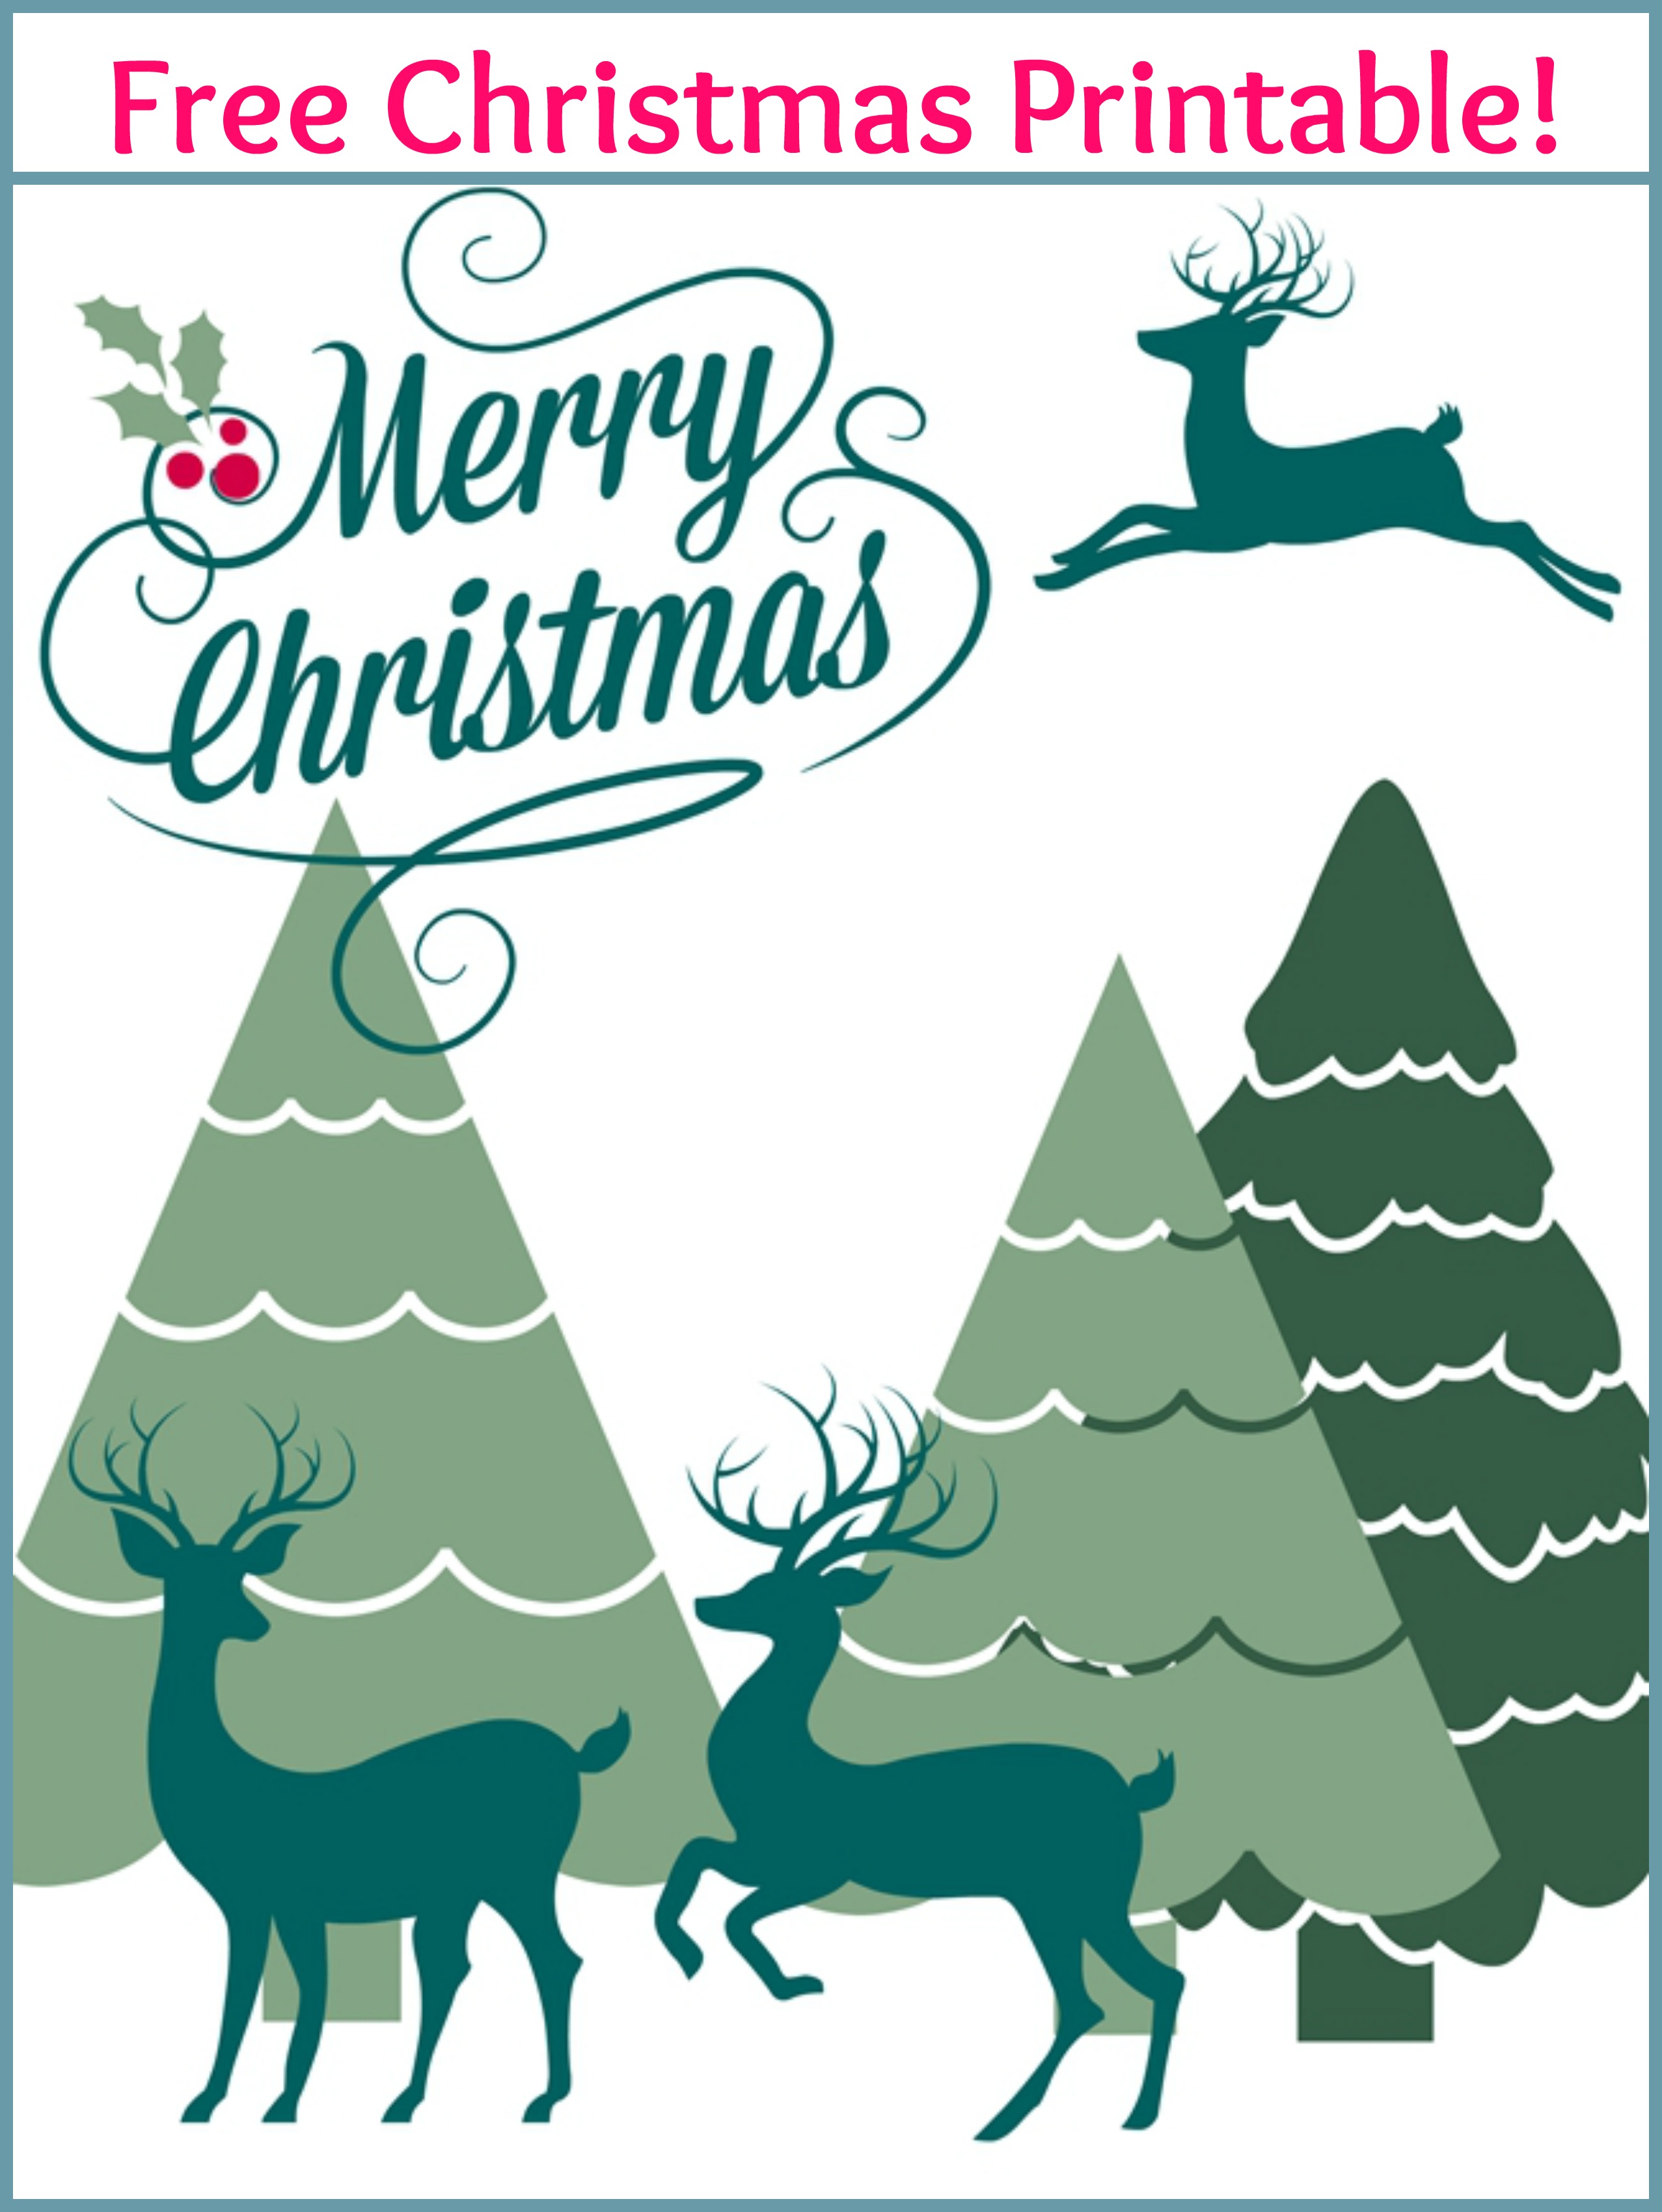 merry-christmas-free-printable-live-creatively-inspired